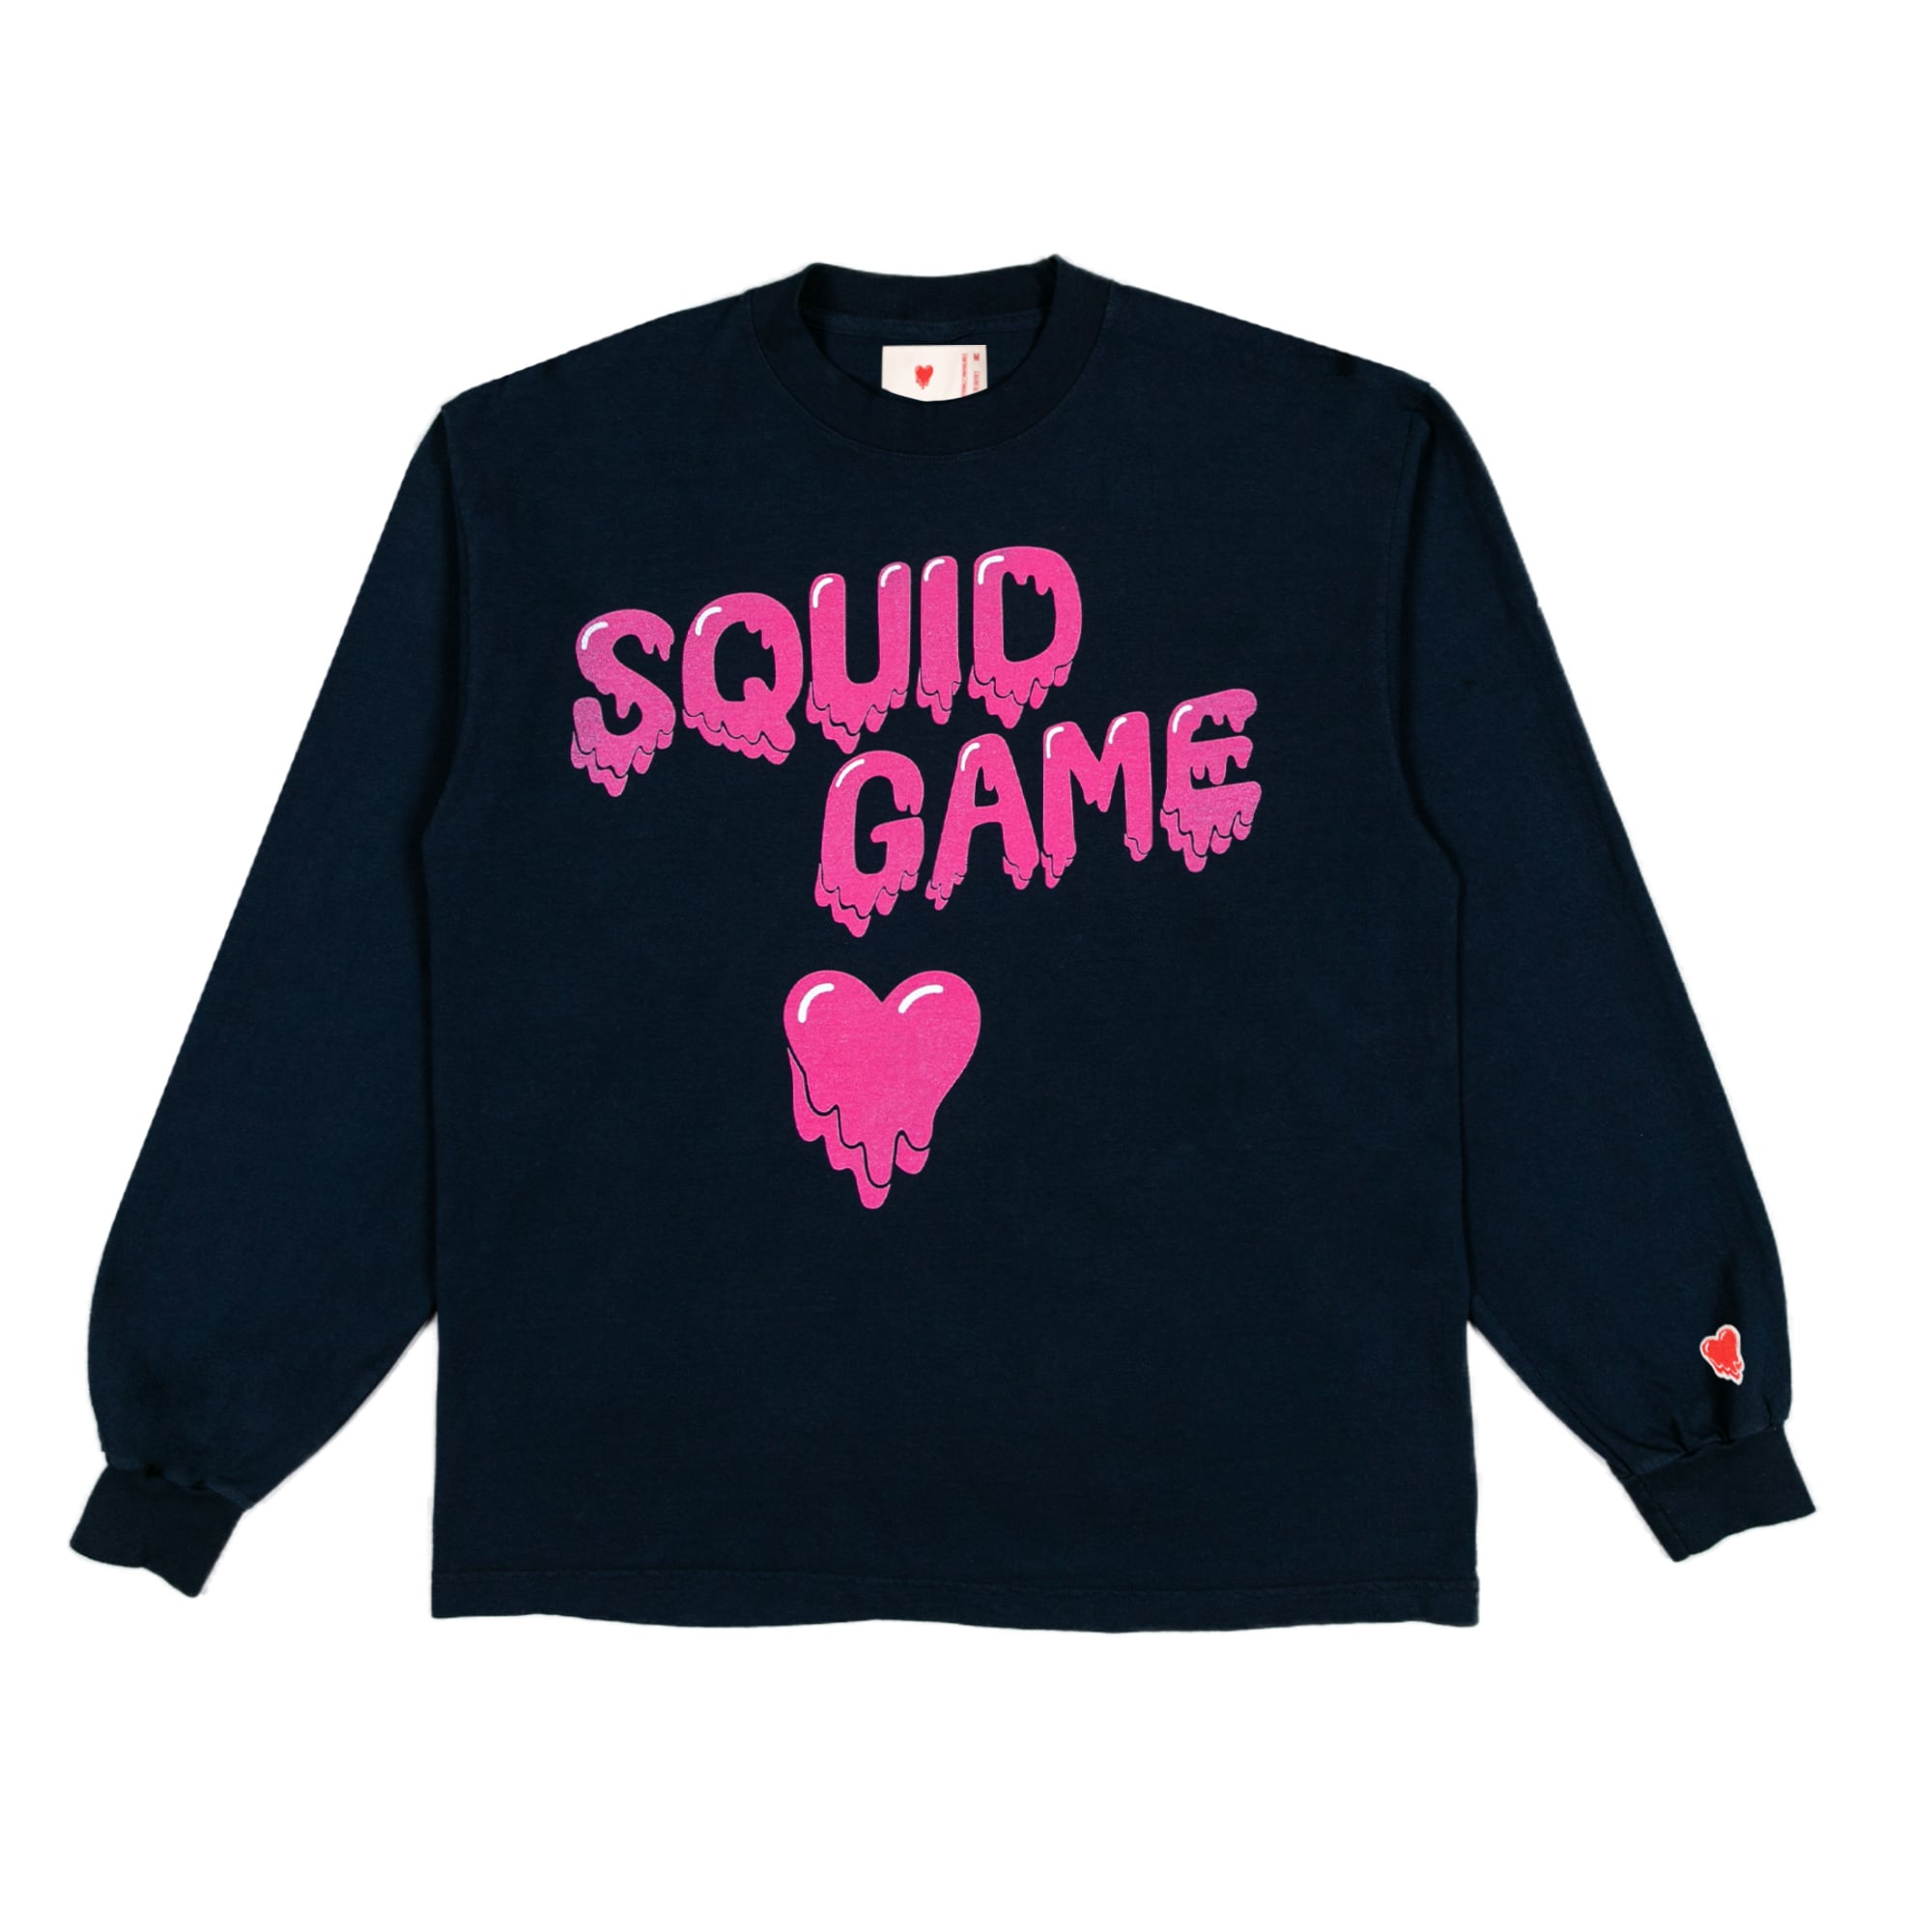 Shop Emotionally Unavailable's Squid Game Merch Collection